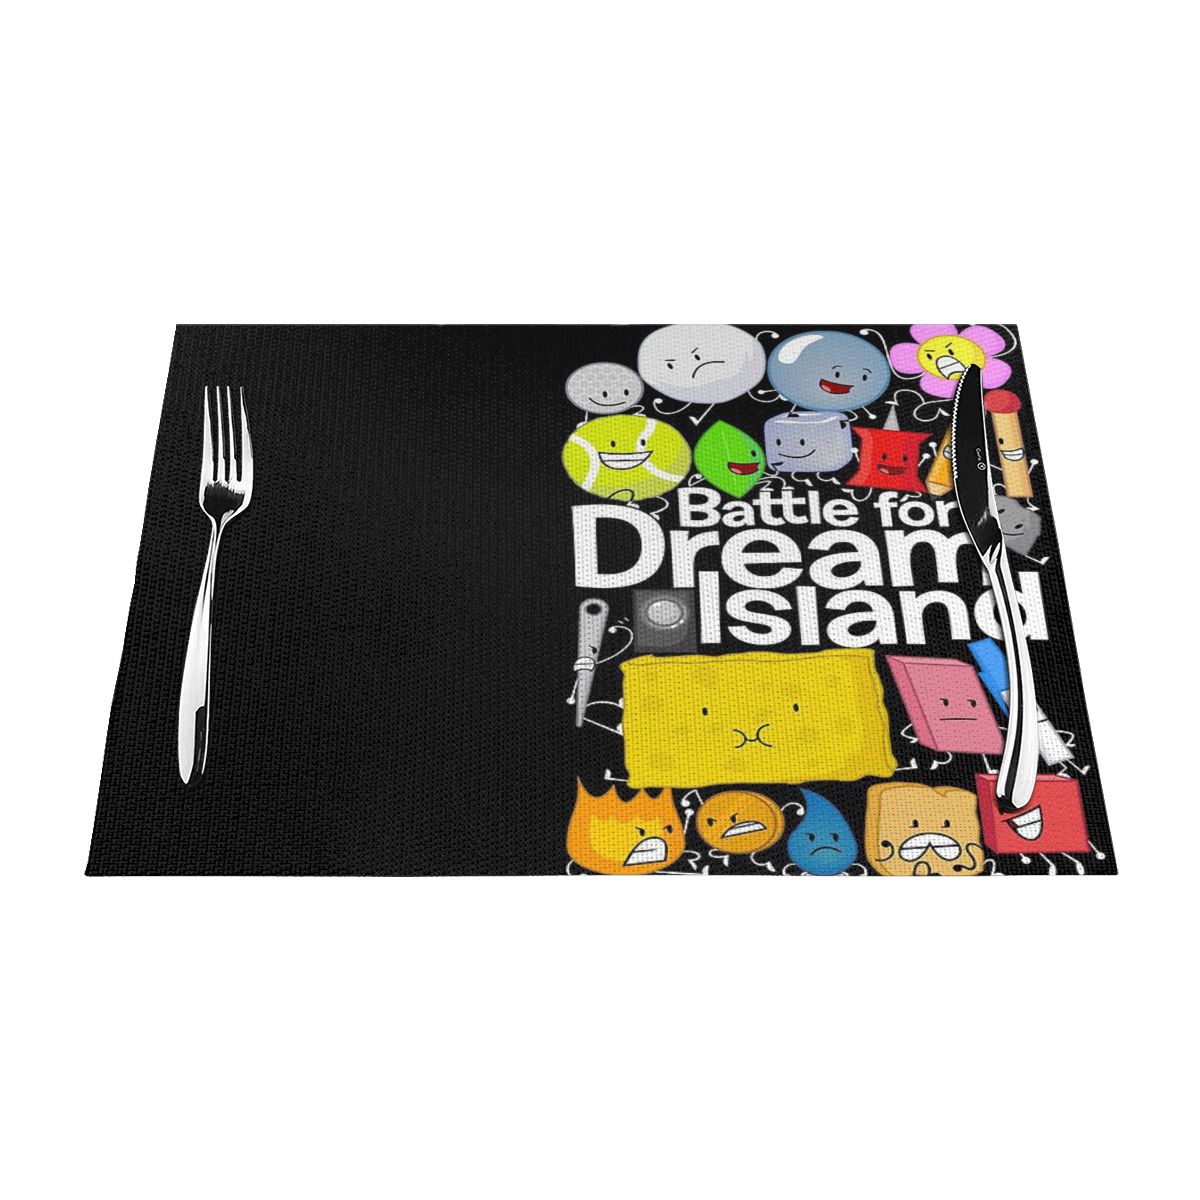 BFDI Poster Black Placemat Beautiful Match with Dark Wood Table Suitable for Barbecue Washable - BFDI Plush